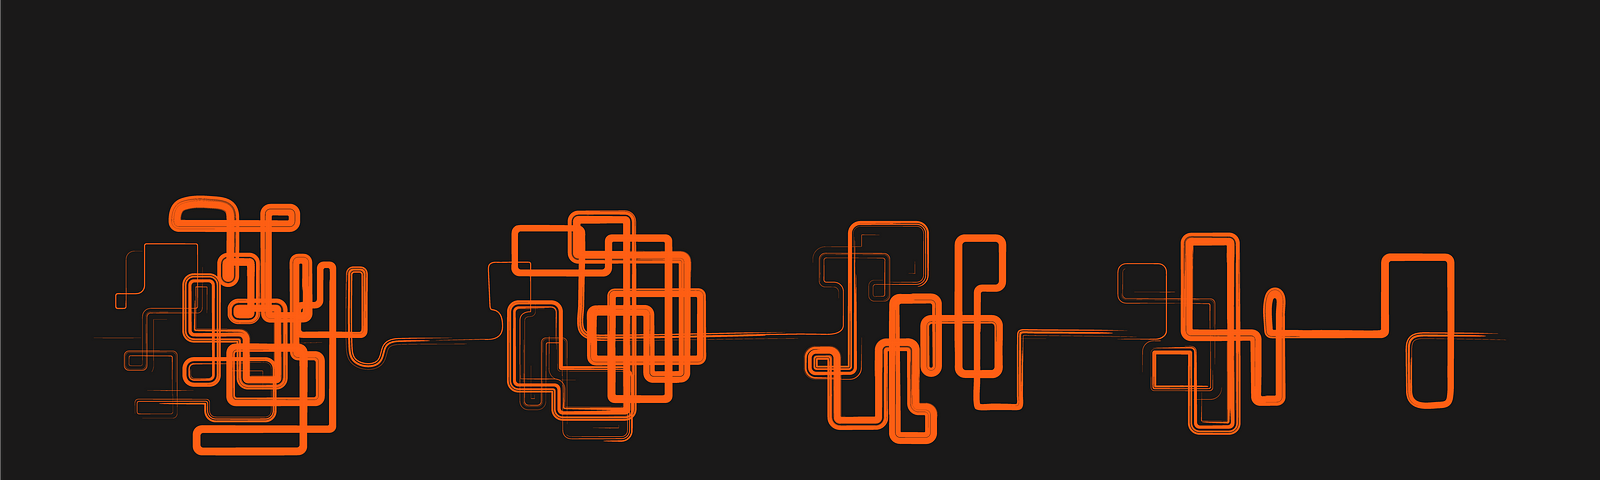 A black background with four orange clusters of lines.